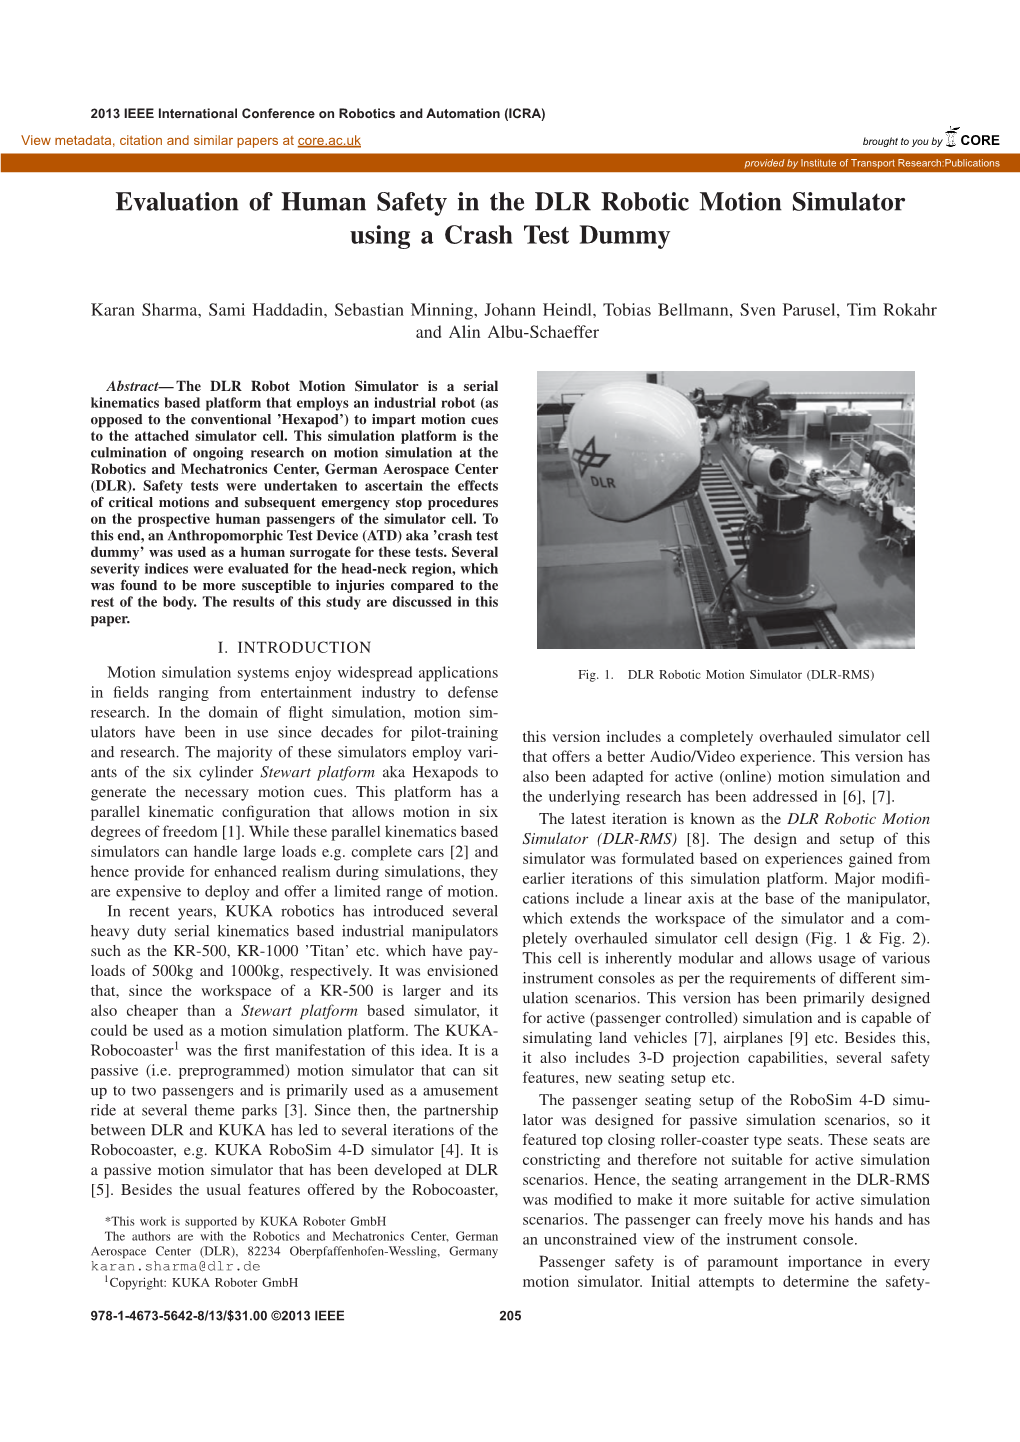 Evaluation of Human Safety in the DLR Robotic Motion Simulator Using a Crash Test Dummy